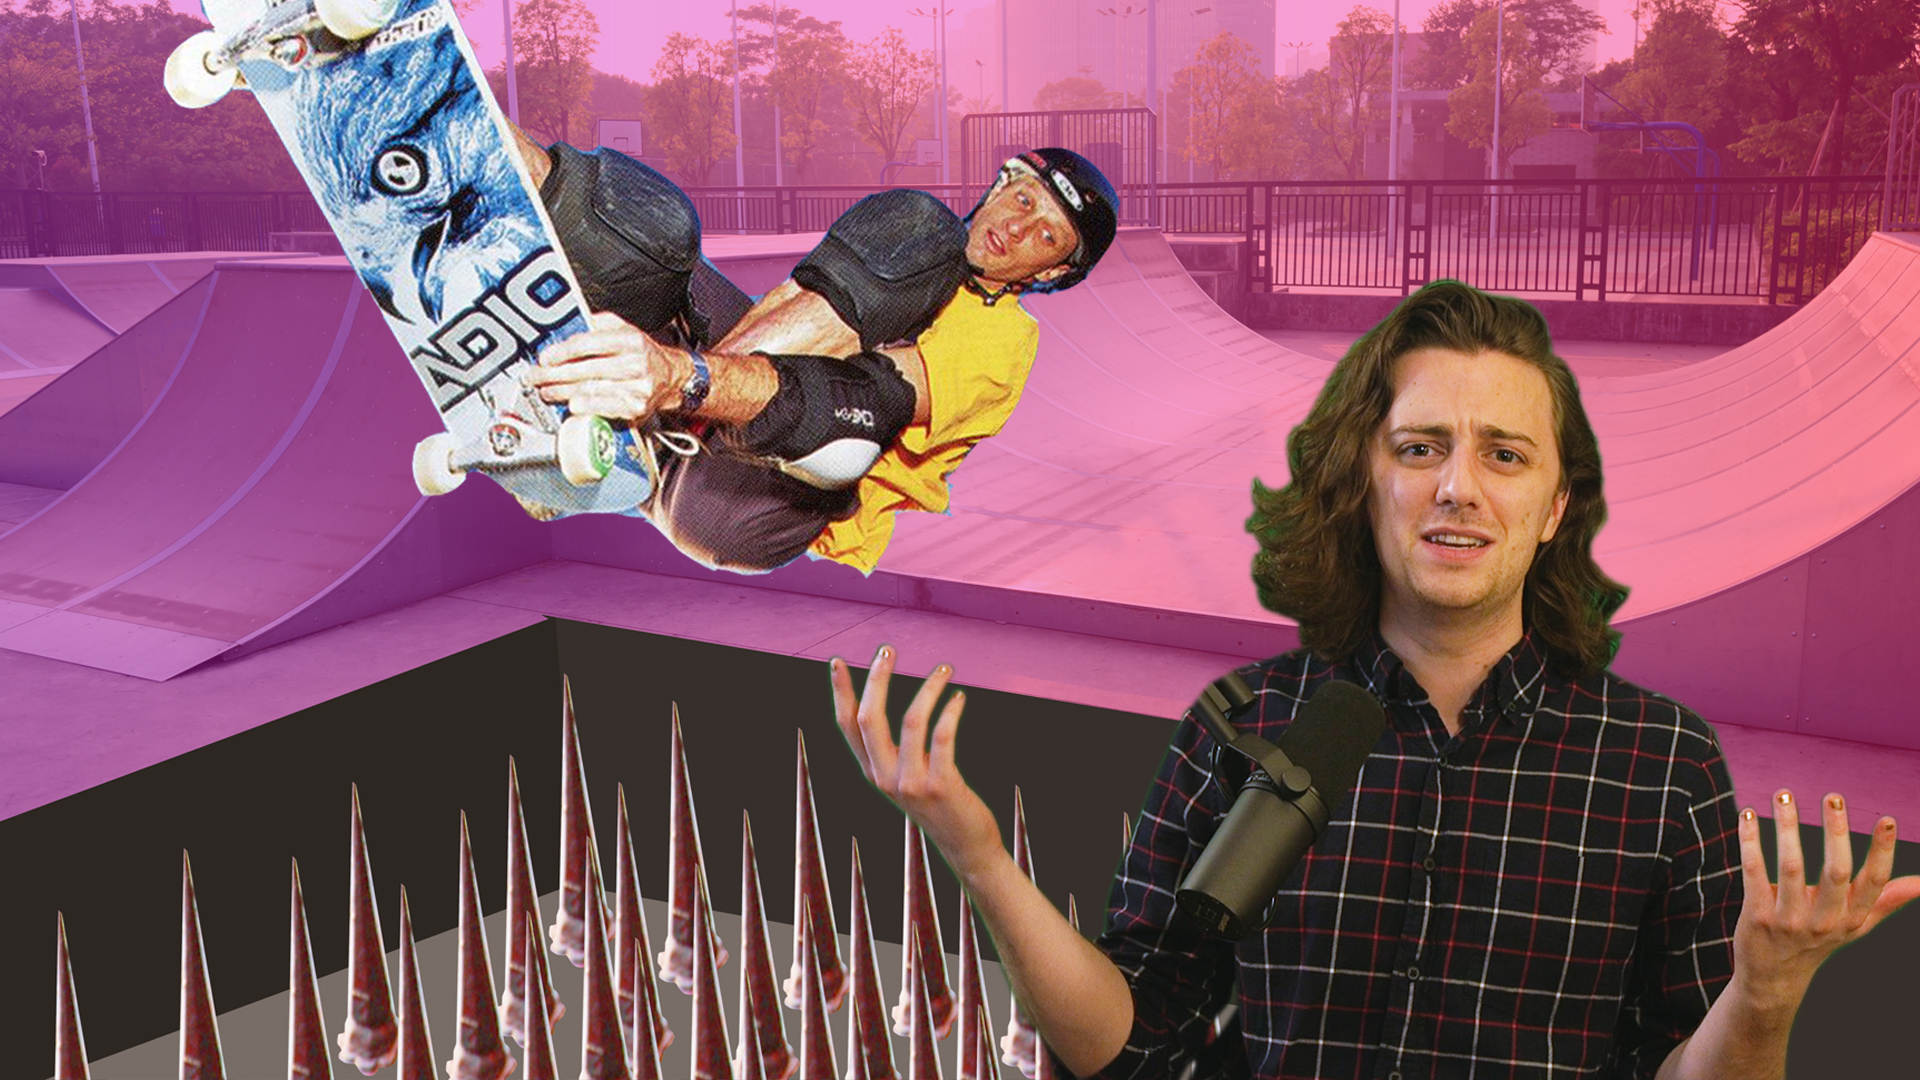 Brian David Gilbert gestures in confusion in front of an image of Tony Hawk falling into a pit of spikes.